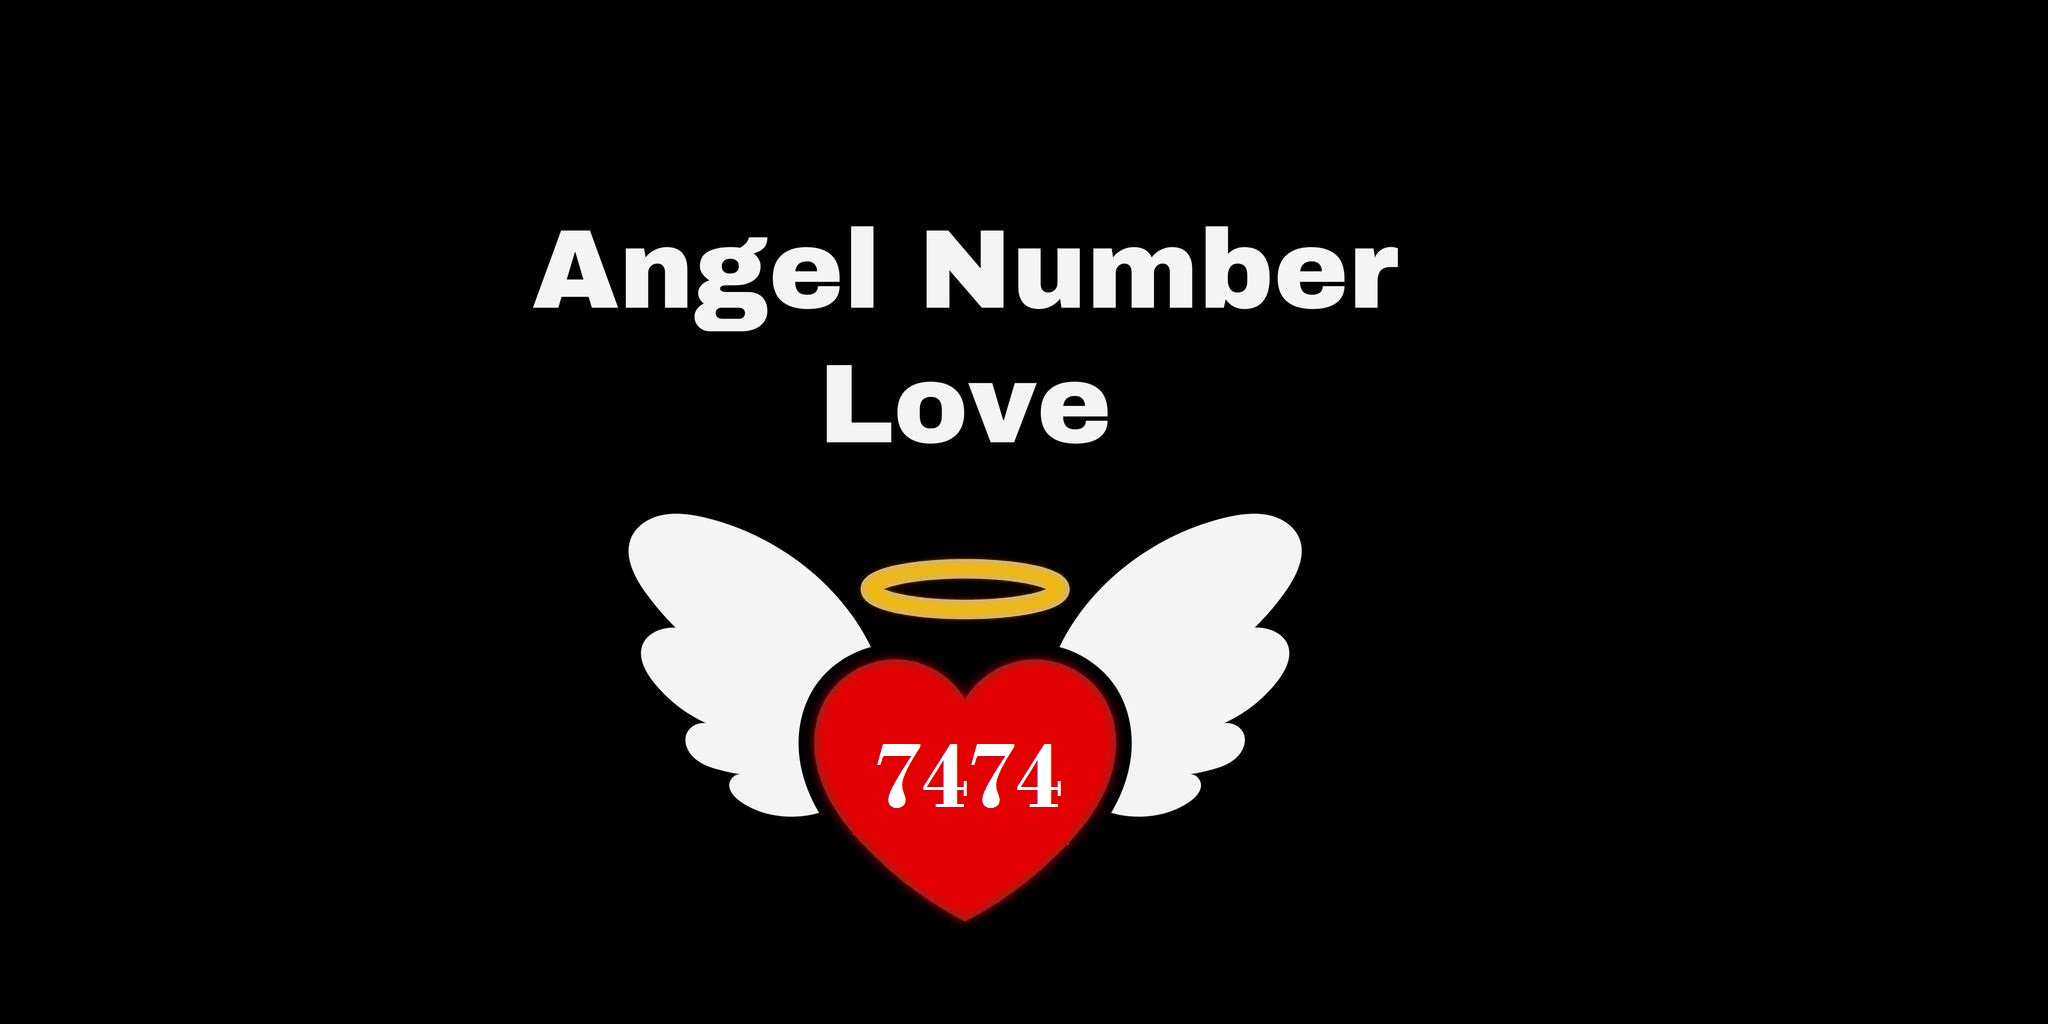 7474 Angel Number Meaning In Love